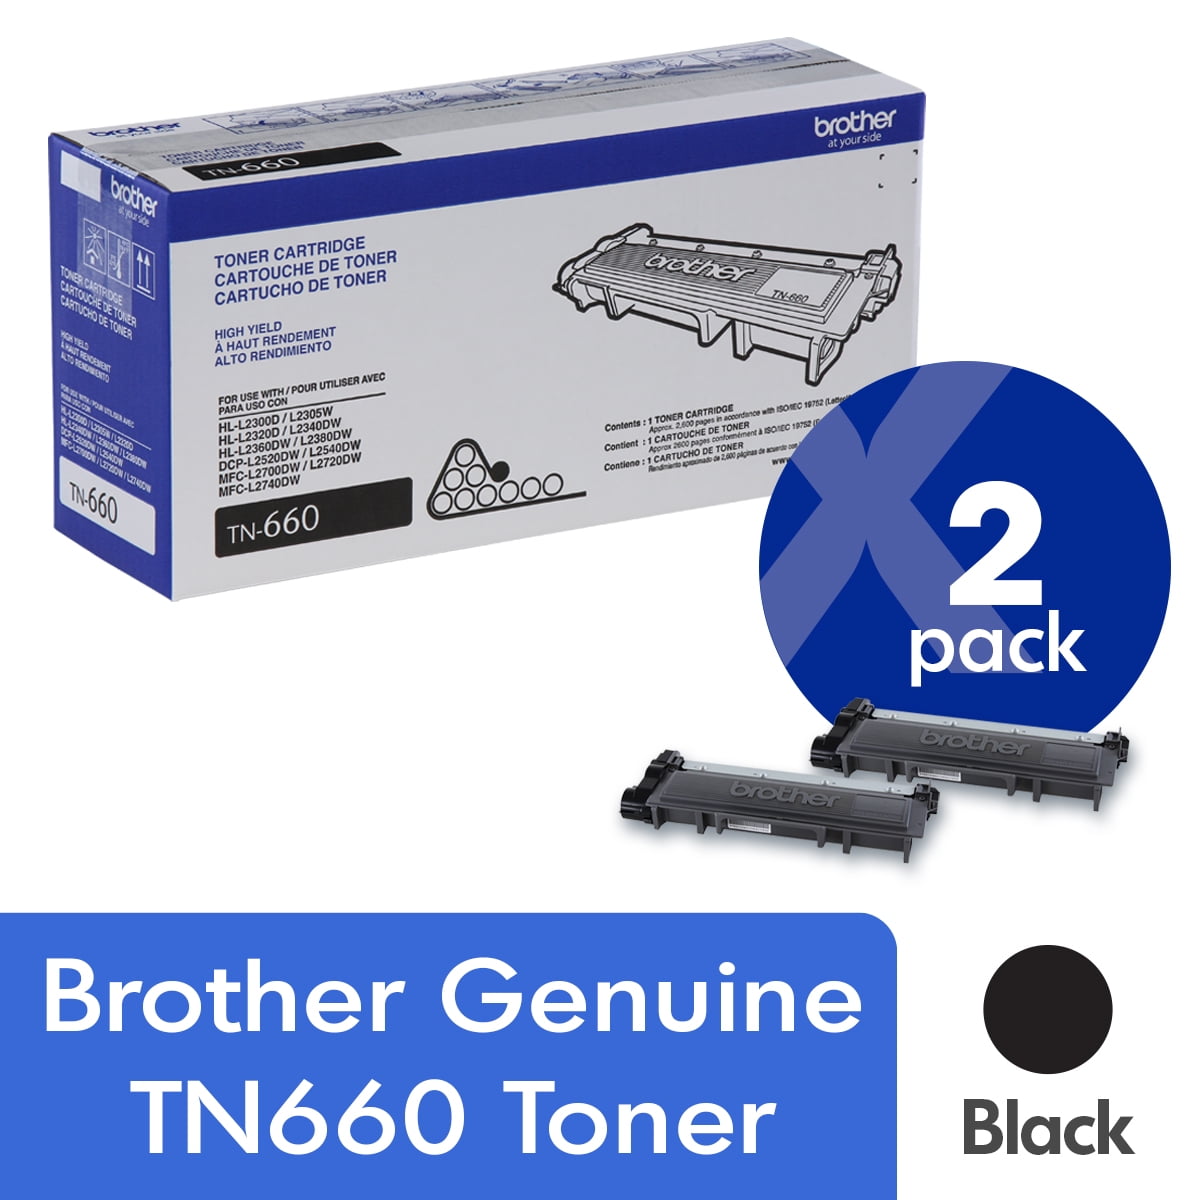 LINKYO PREMIUM BLACK Replacement Cartridge LY-BR-TN660 Brother